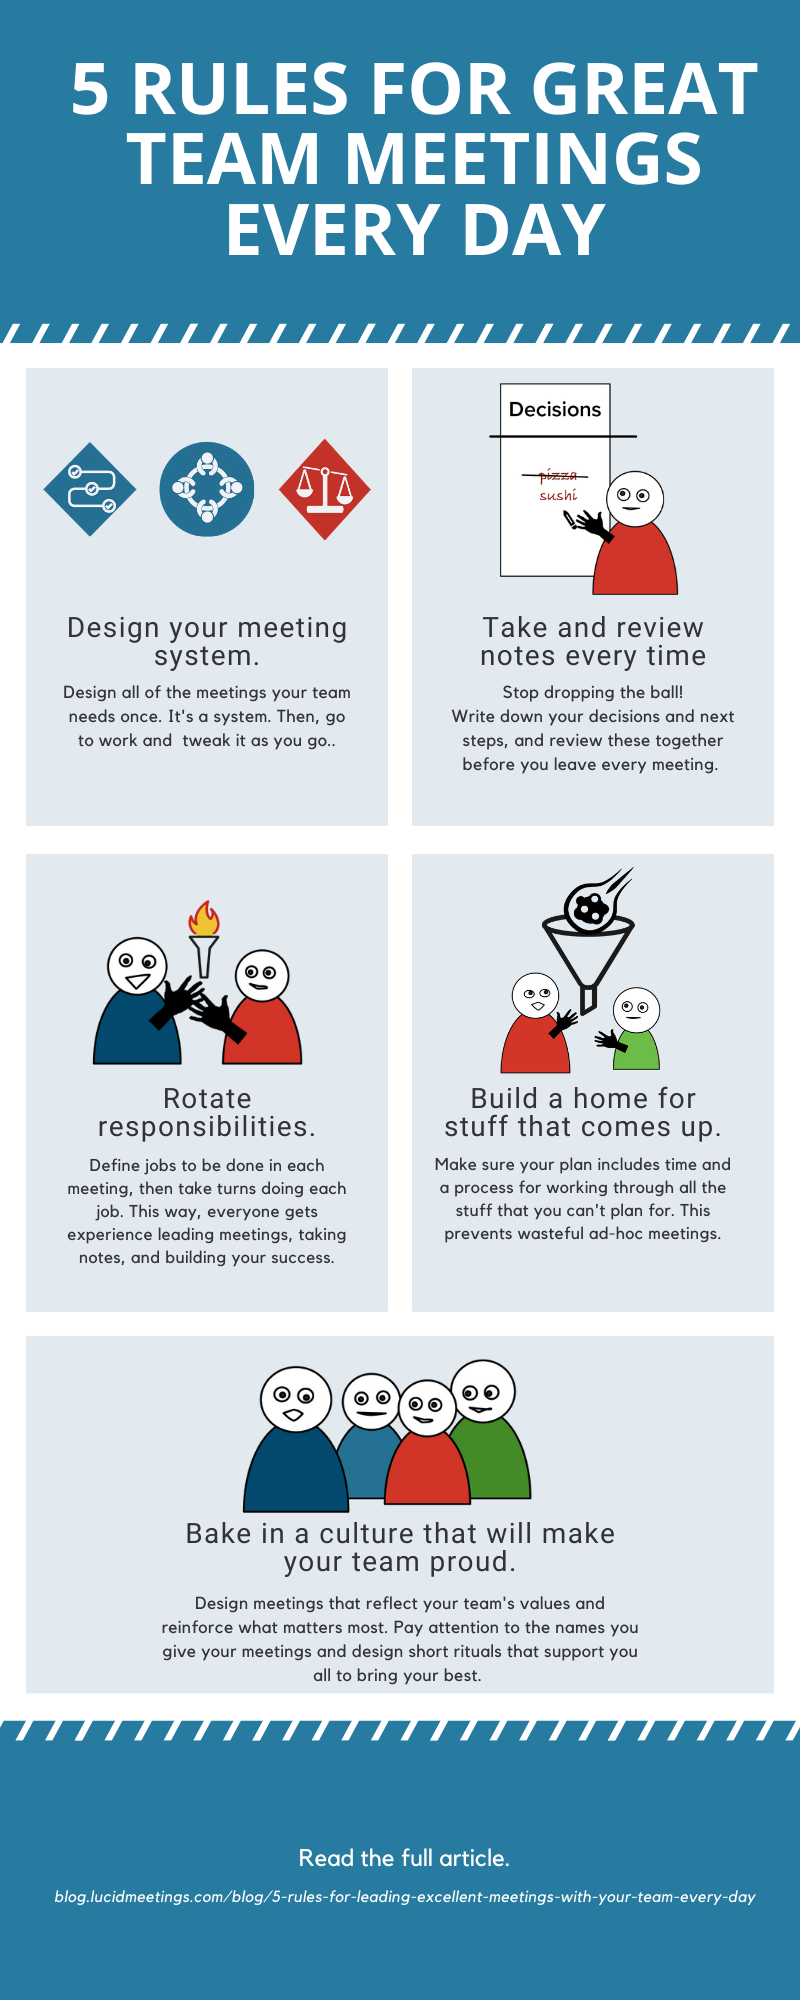 5 Lucid Rules for Great Meetings